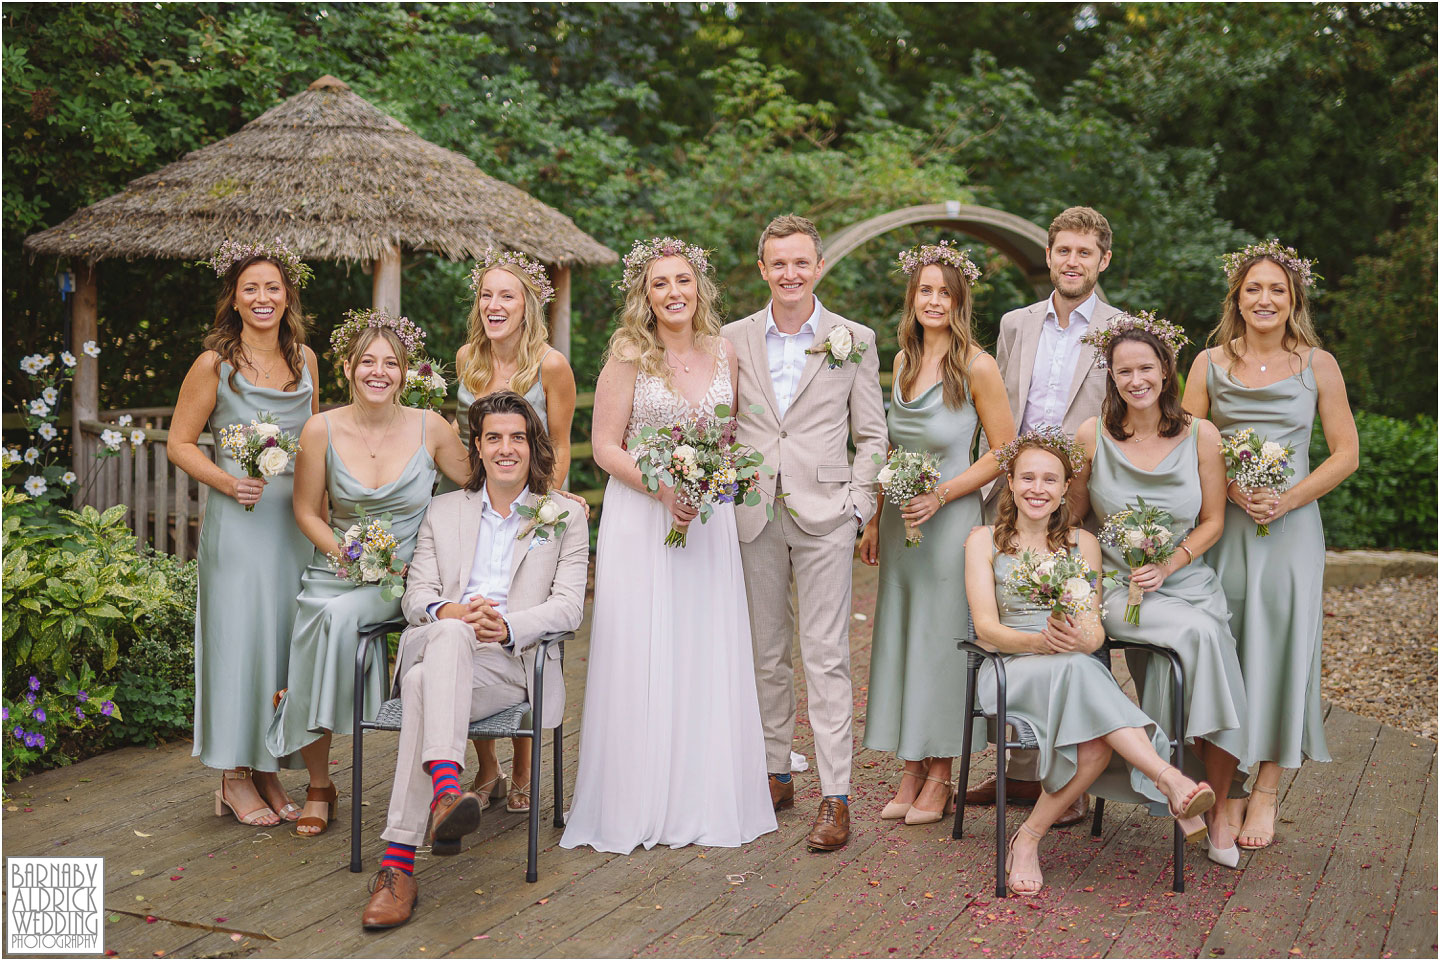 Relaxed wedding group pictures at Crimple Hall near Harrogate by Yorkshire Wedding Photographer Barnaby Aldrick